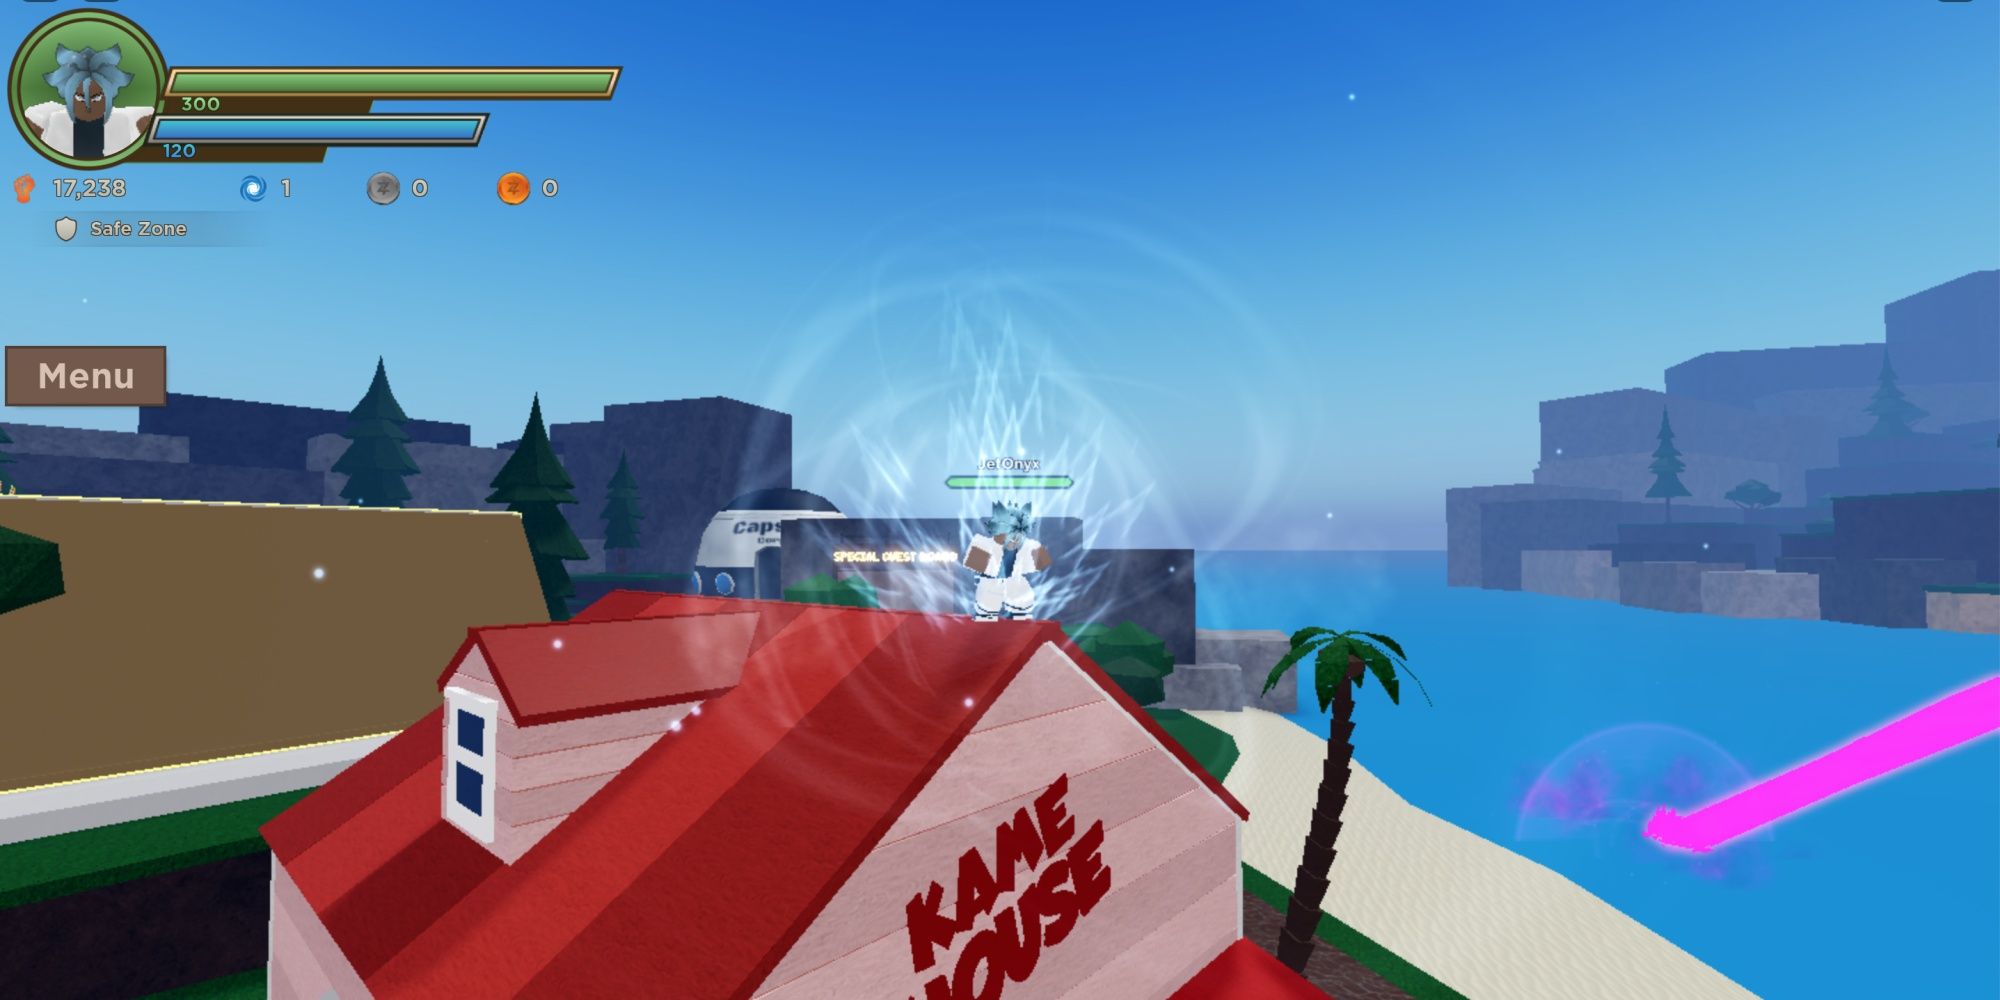 A Roblox player powering up on the roof of Kame House in Dragon Blox